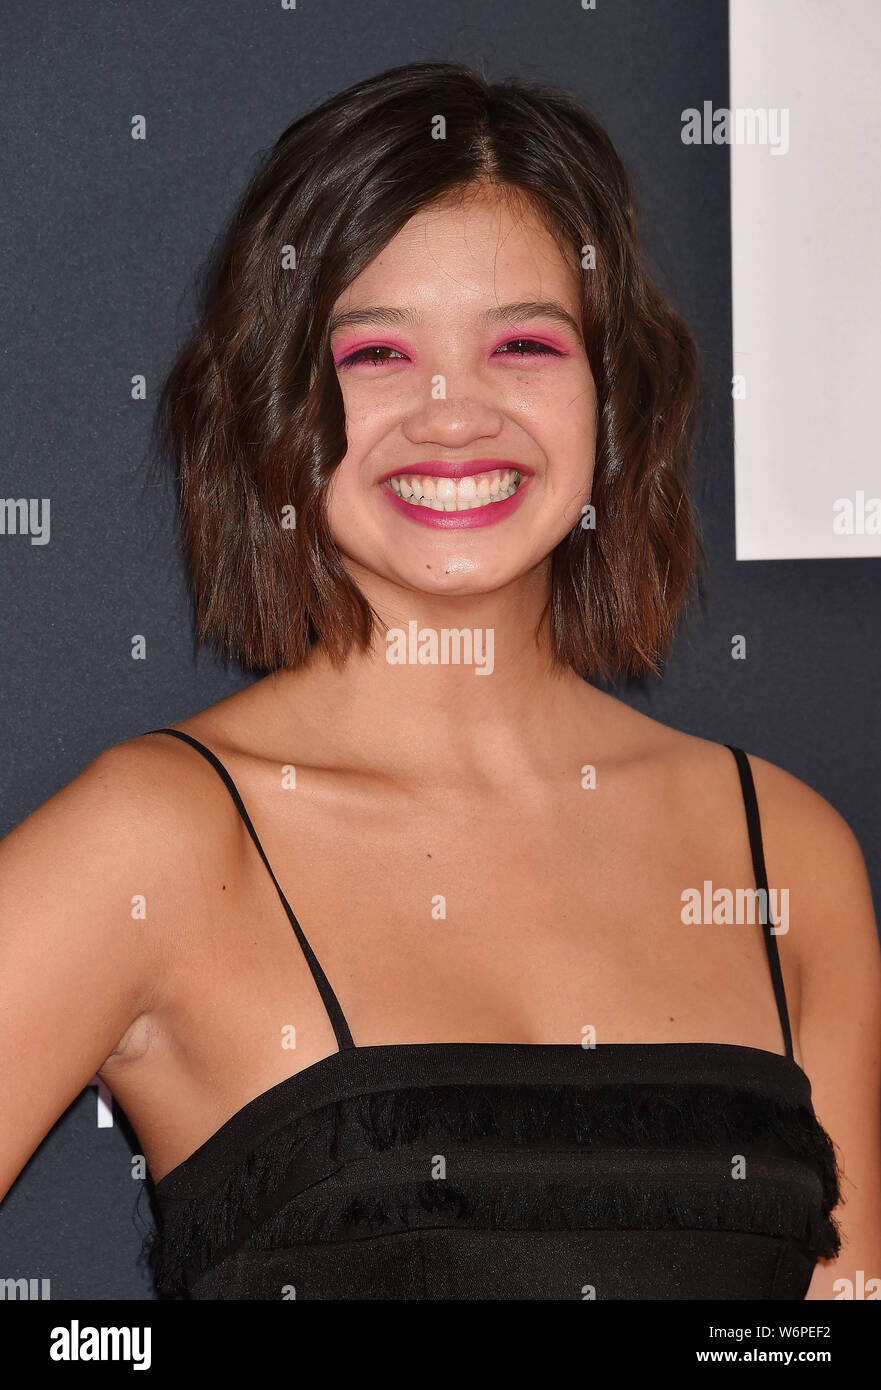 LOS ANGELES, CA - AUGUST 01: Peyton Elizabeth Lee attends the Premiere Of 20th Century Fox's 'The Art Of Racing In The Rain' at El Capitan Theatre on August 01, 2019 in Los Angeles, California. Stock Photo